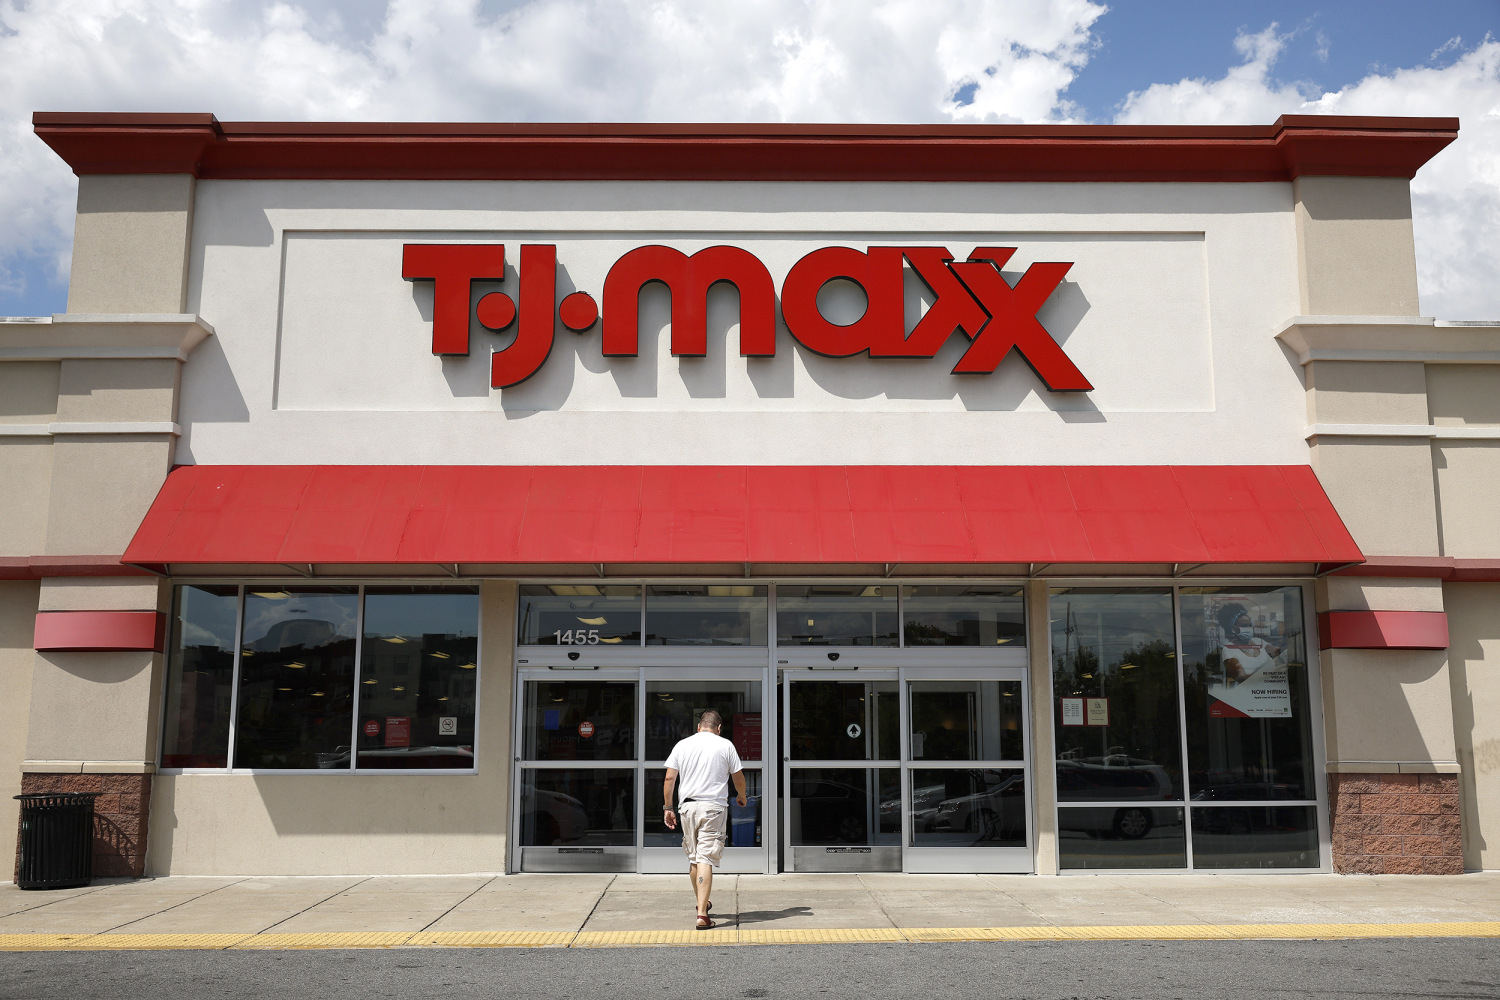 Michaels to take most of T.J. Maxx's former space in Hicksville - Newsday